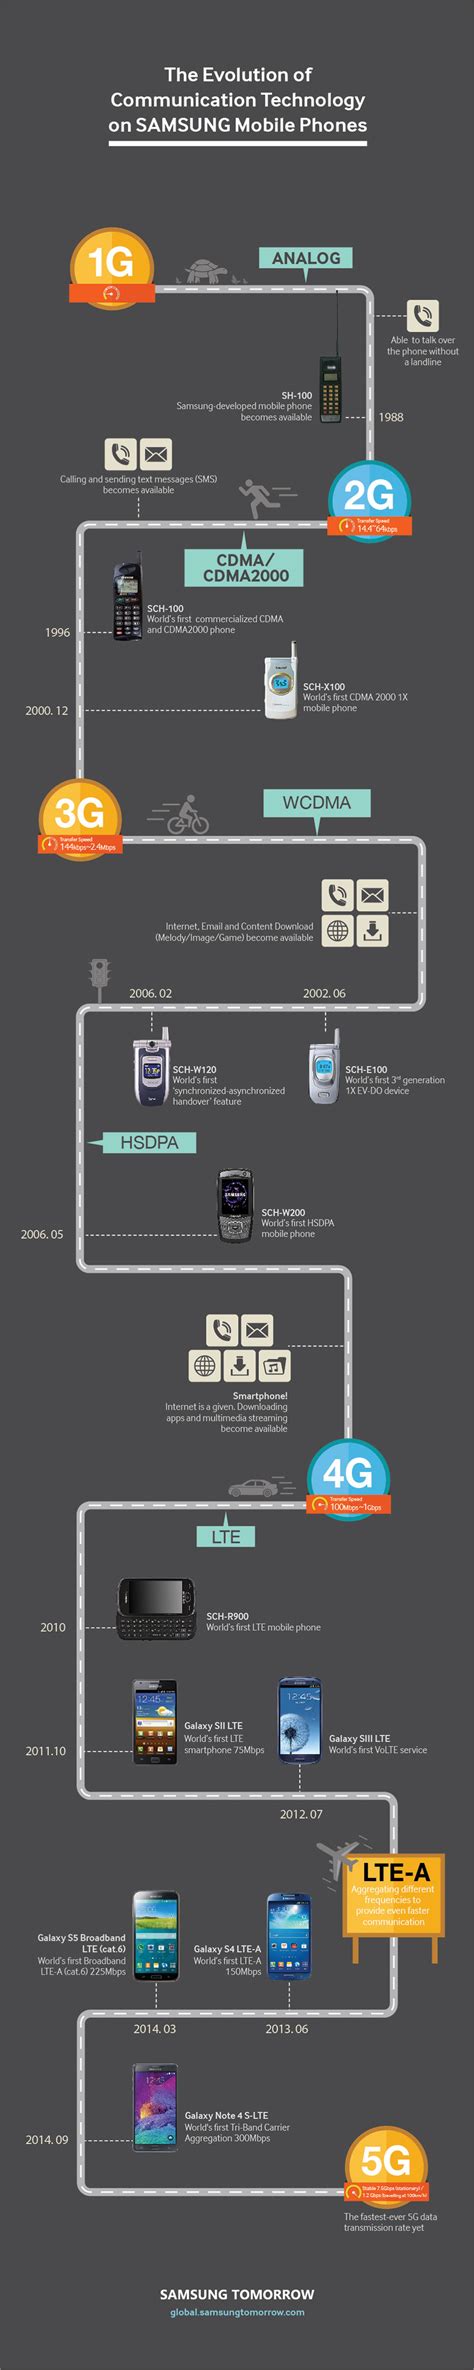 Infographic The Evolution Of Communication Technology On Samsung